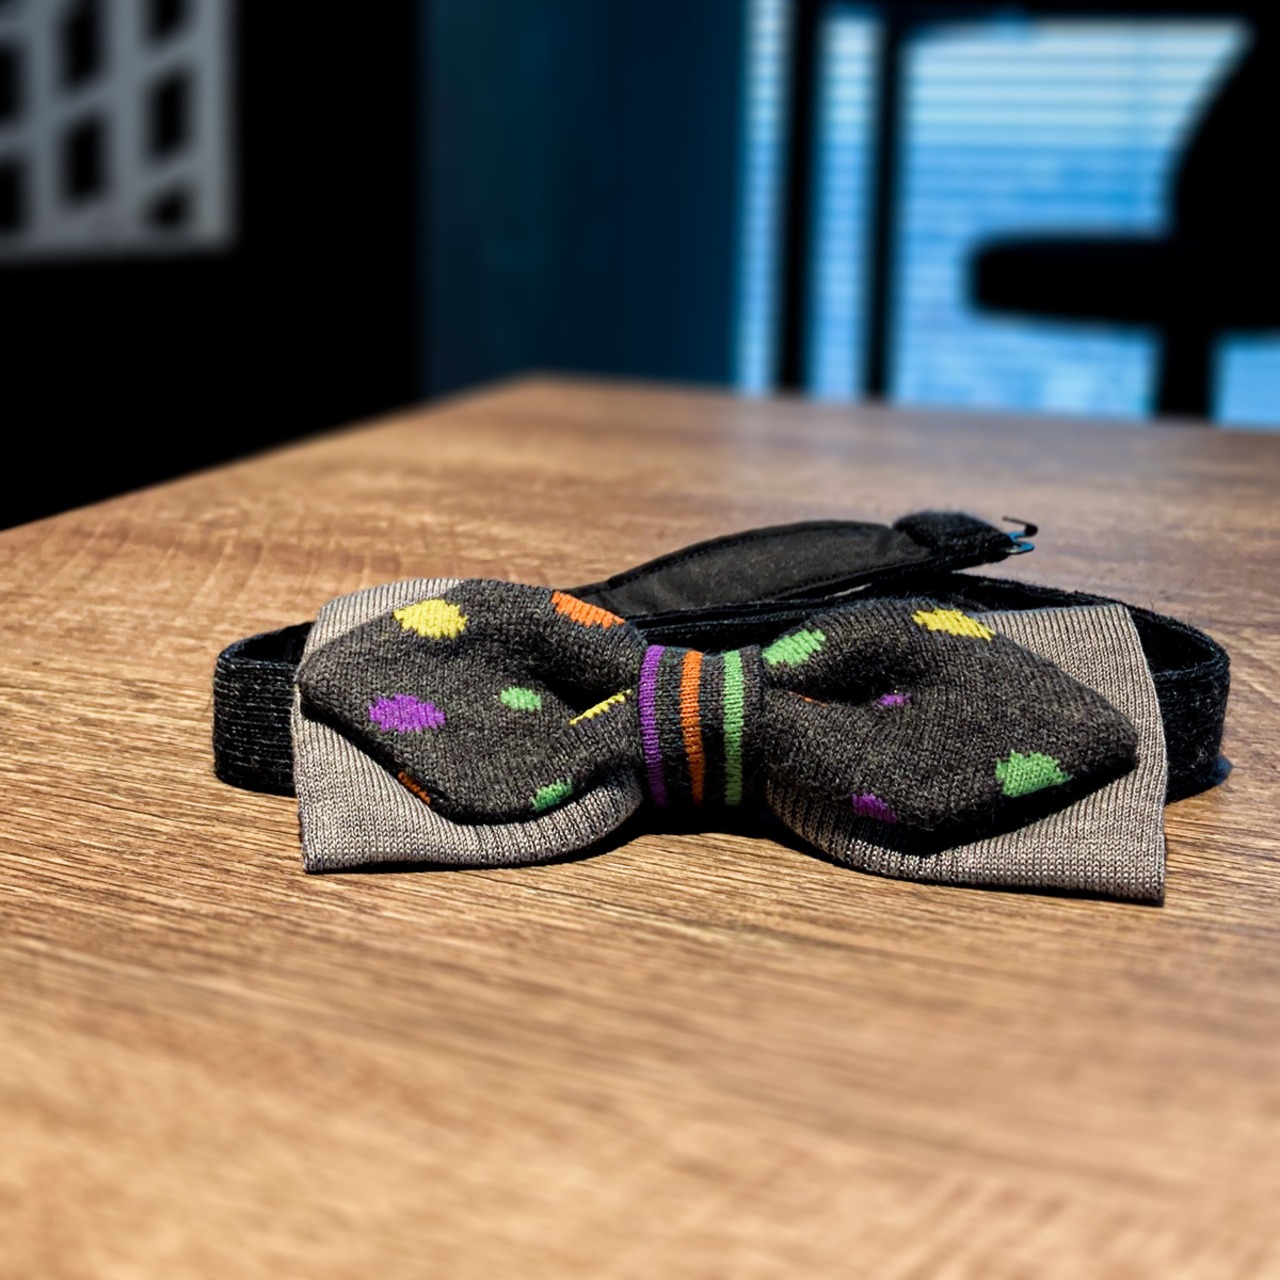 BOW TIE MADE OF SOCKS @COLORFUL POLKA DOTS　　